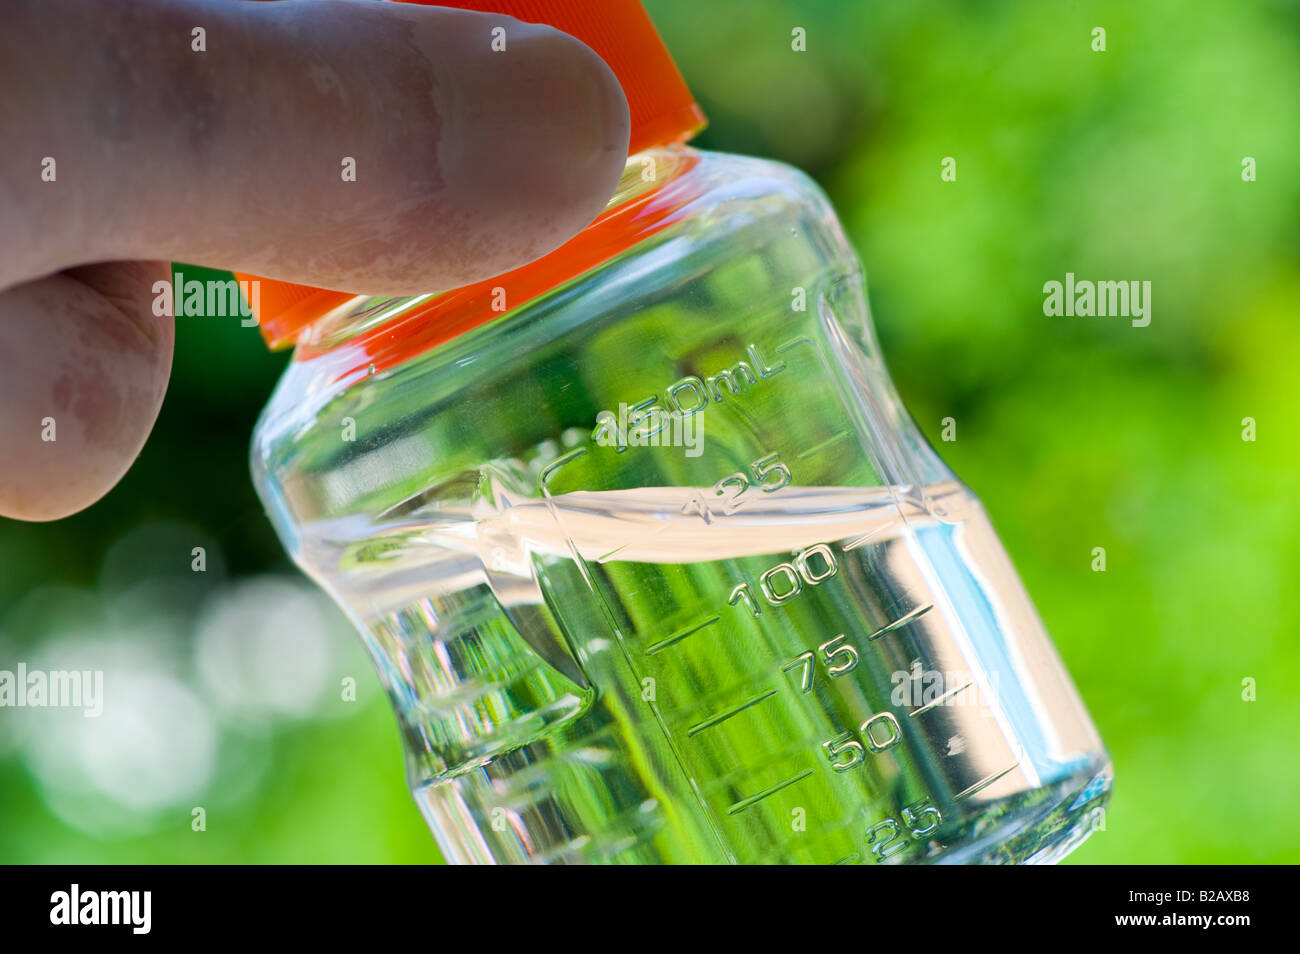 hand holding  small vial of clear fluid outdoors Stock Photo